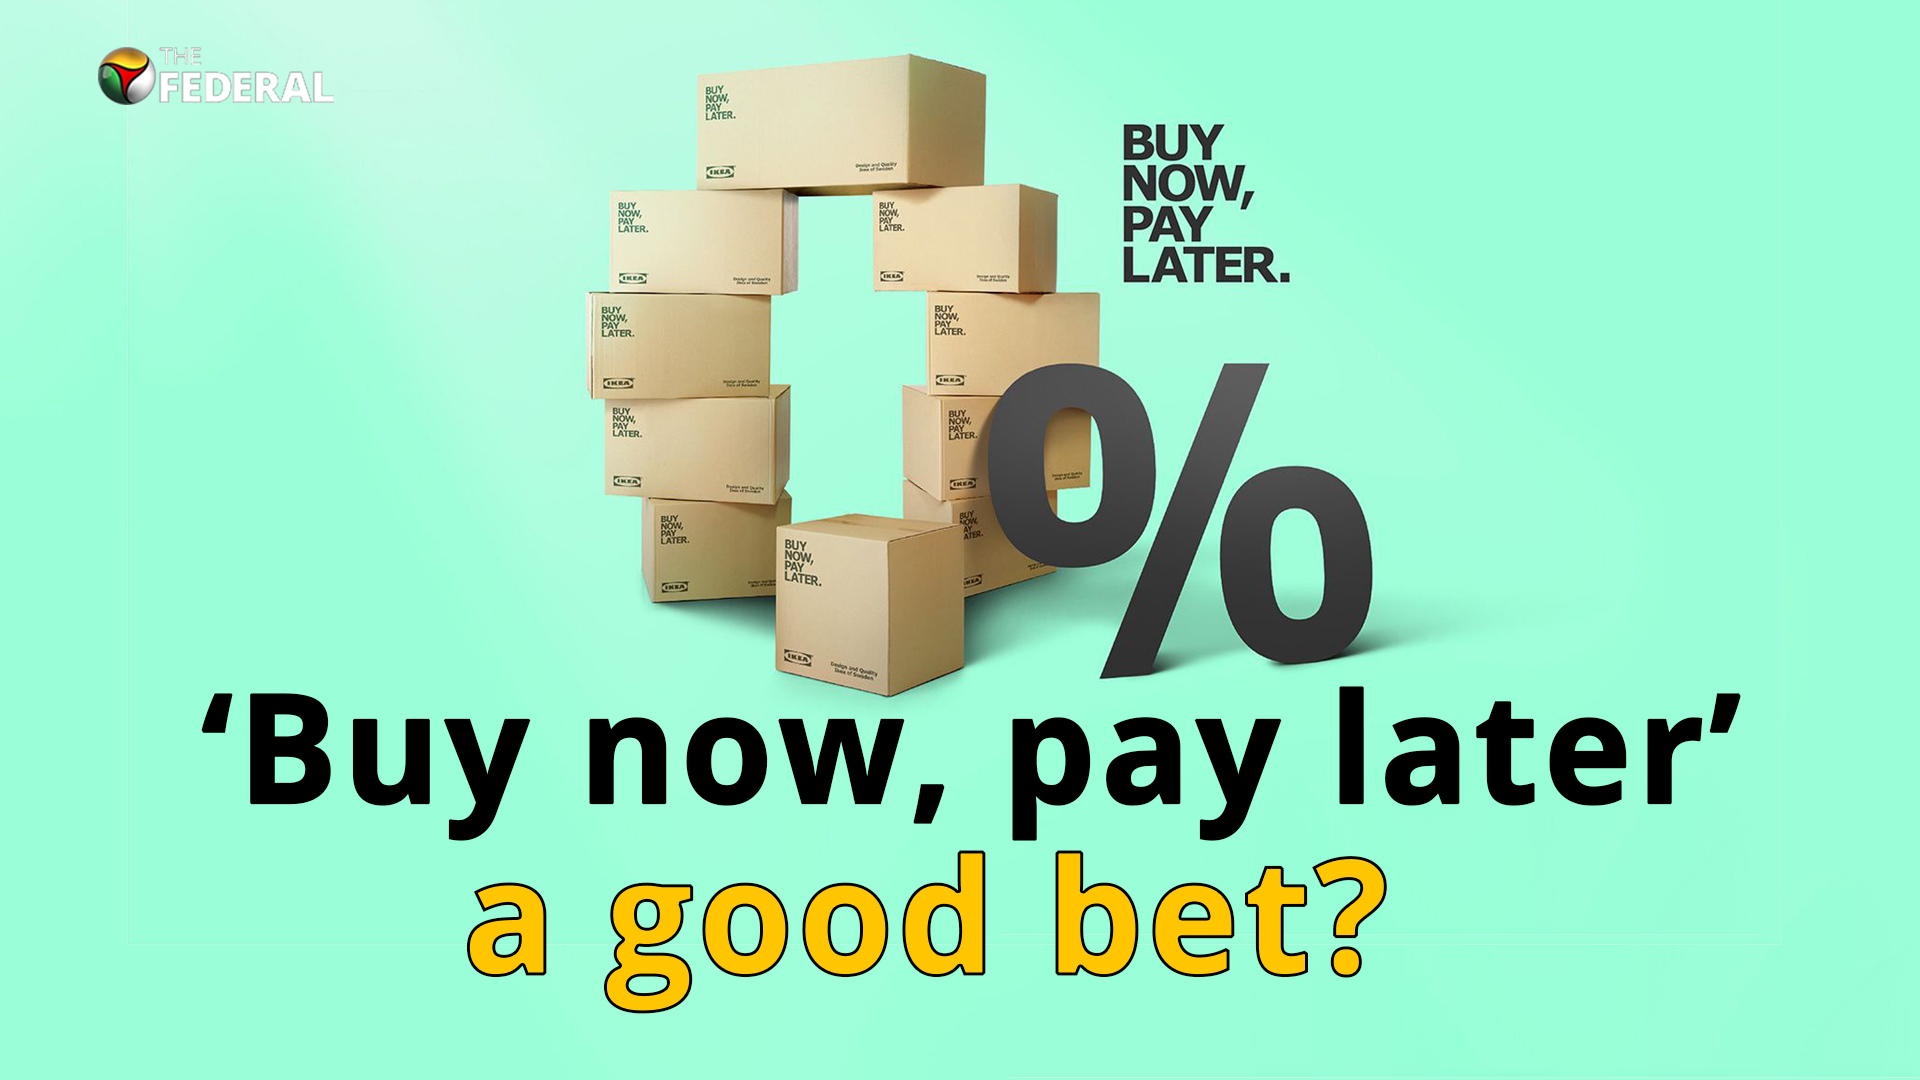 Explained: The ‘buy now pay later’ trend that is catching online shoppers’ fancy